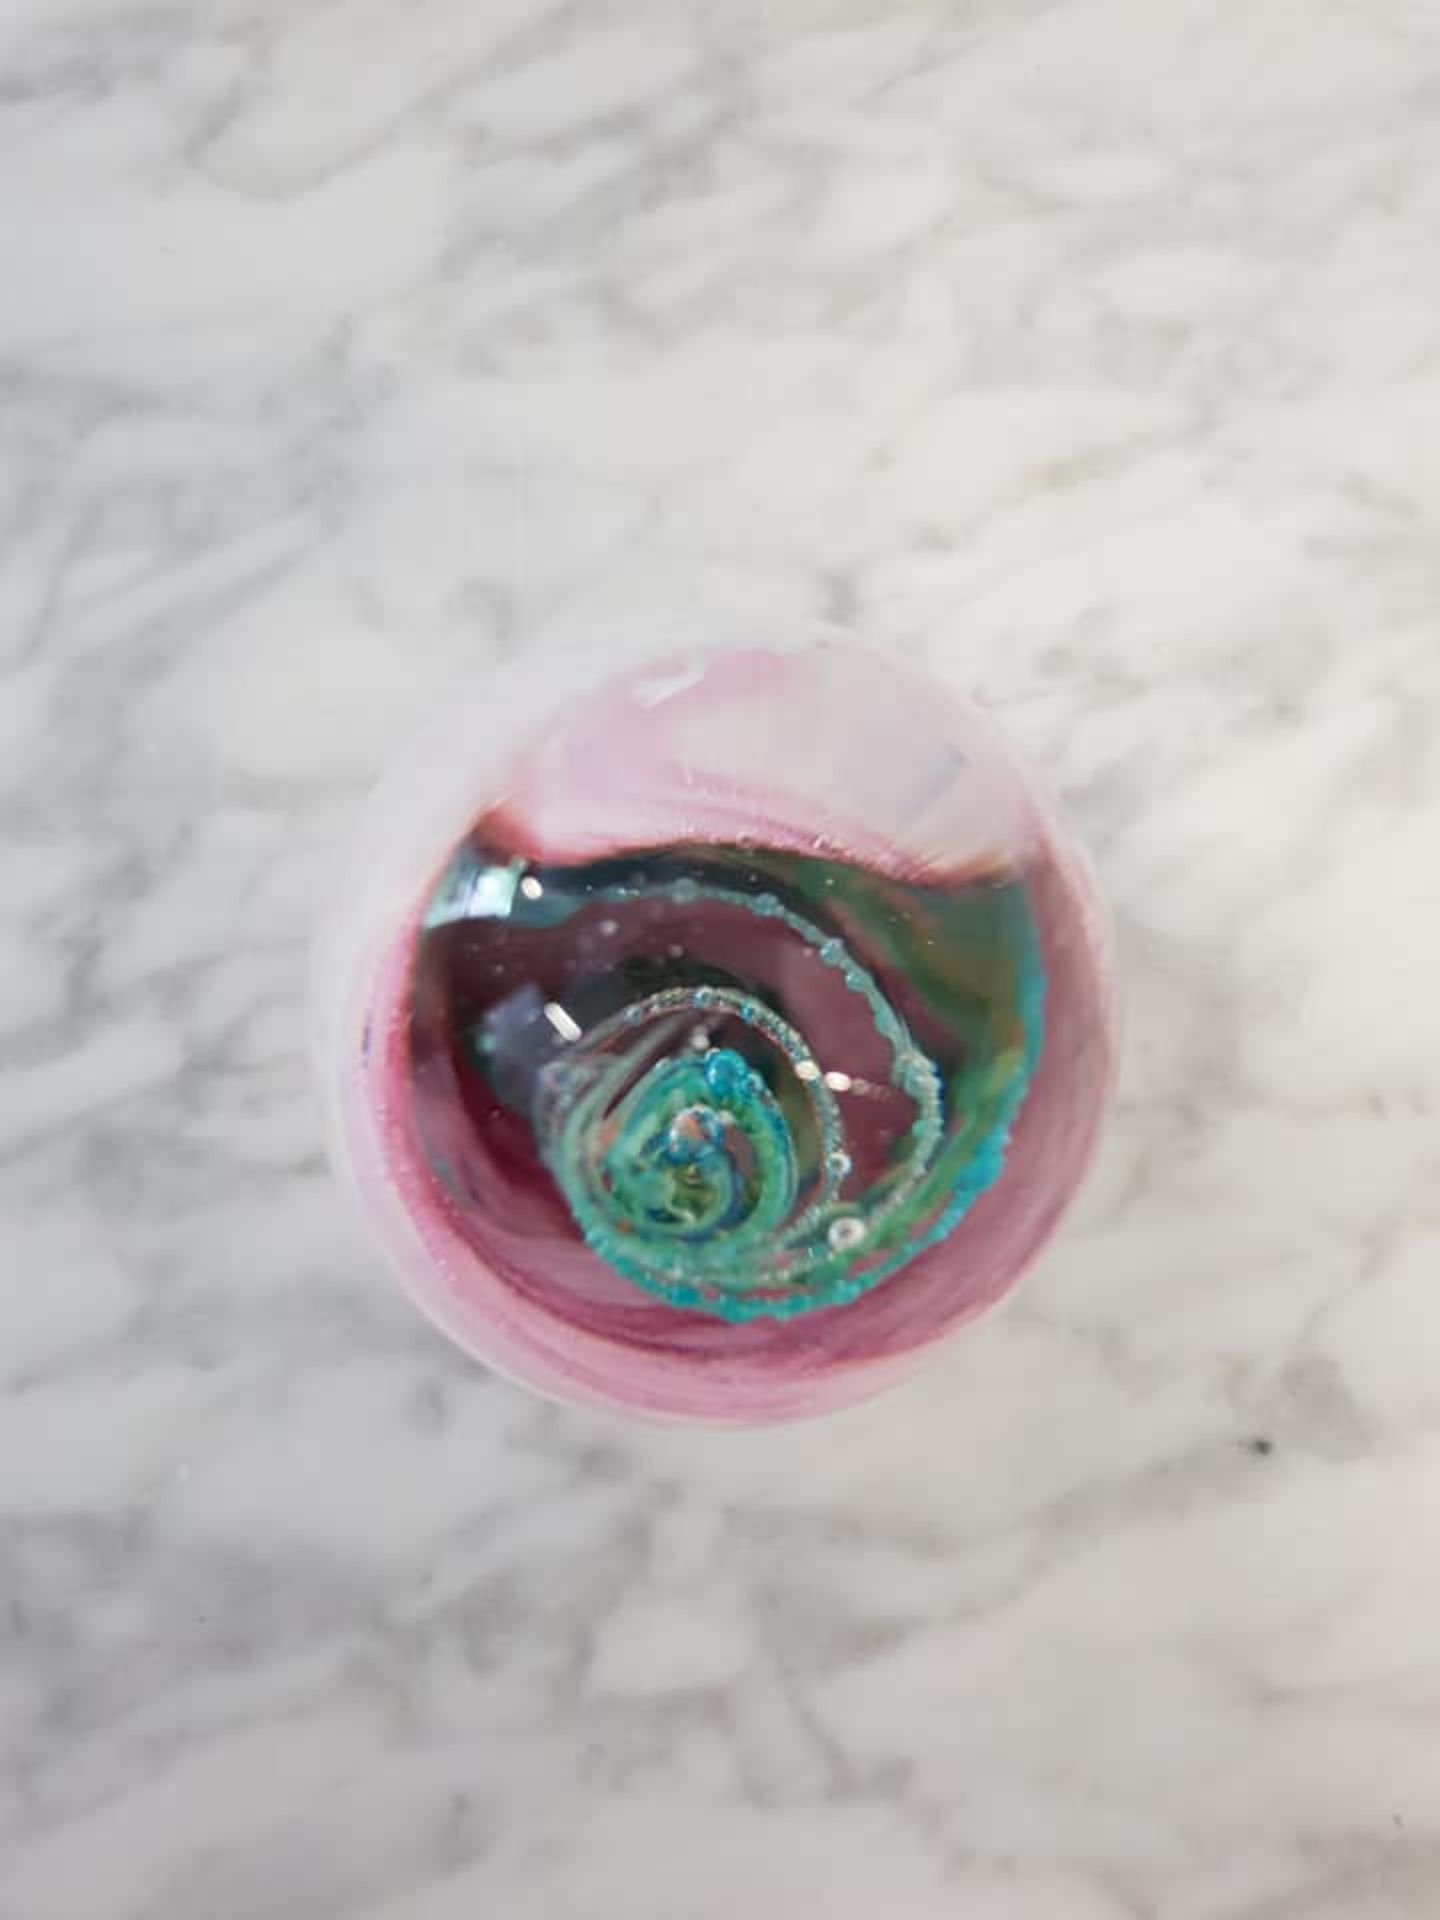 Bohemian blown art glass ovoid paperweight 10cm pink and white with a green floral design - Image 2 of 2